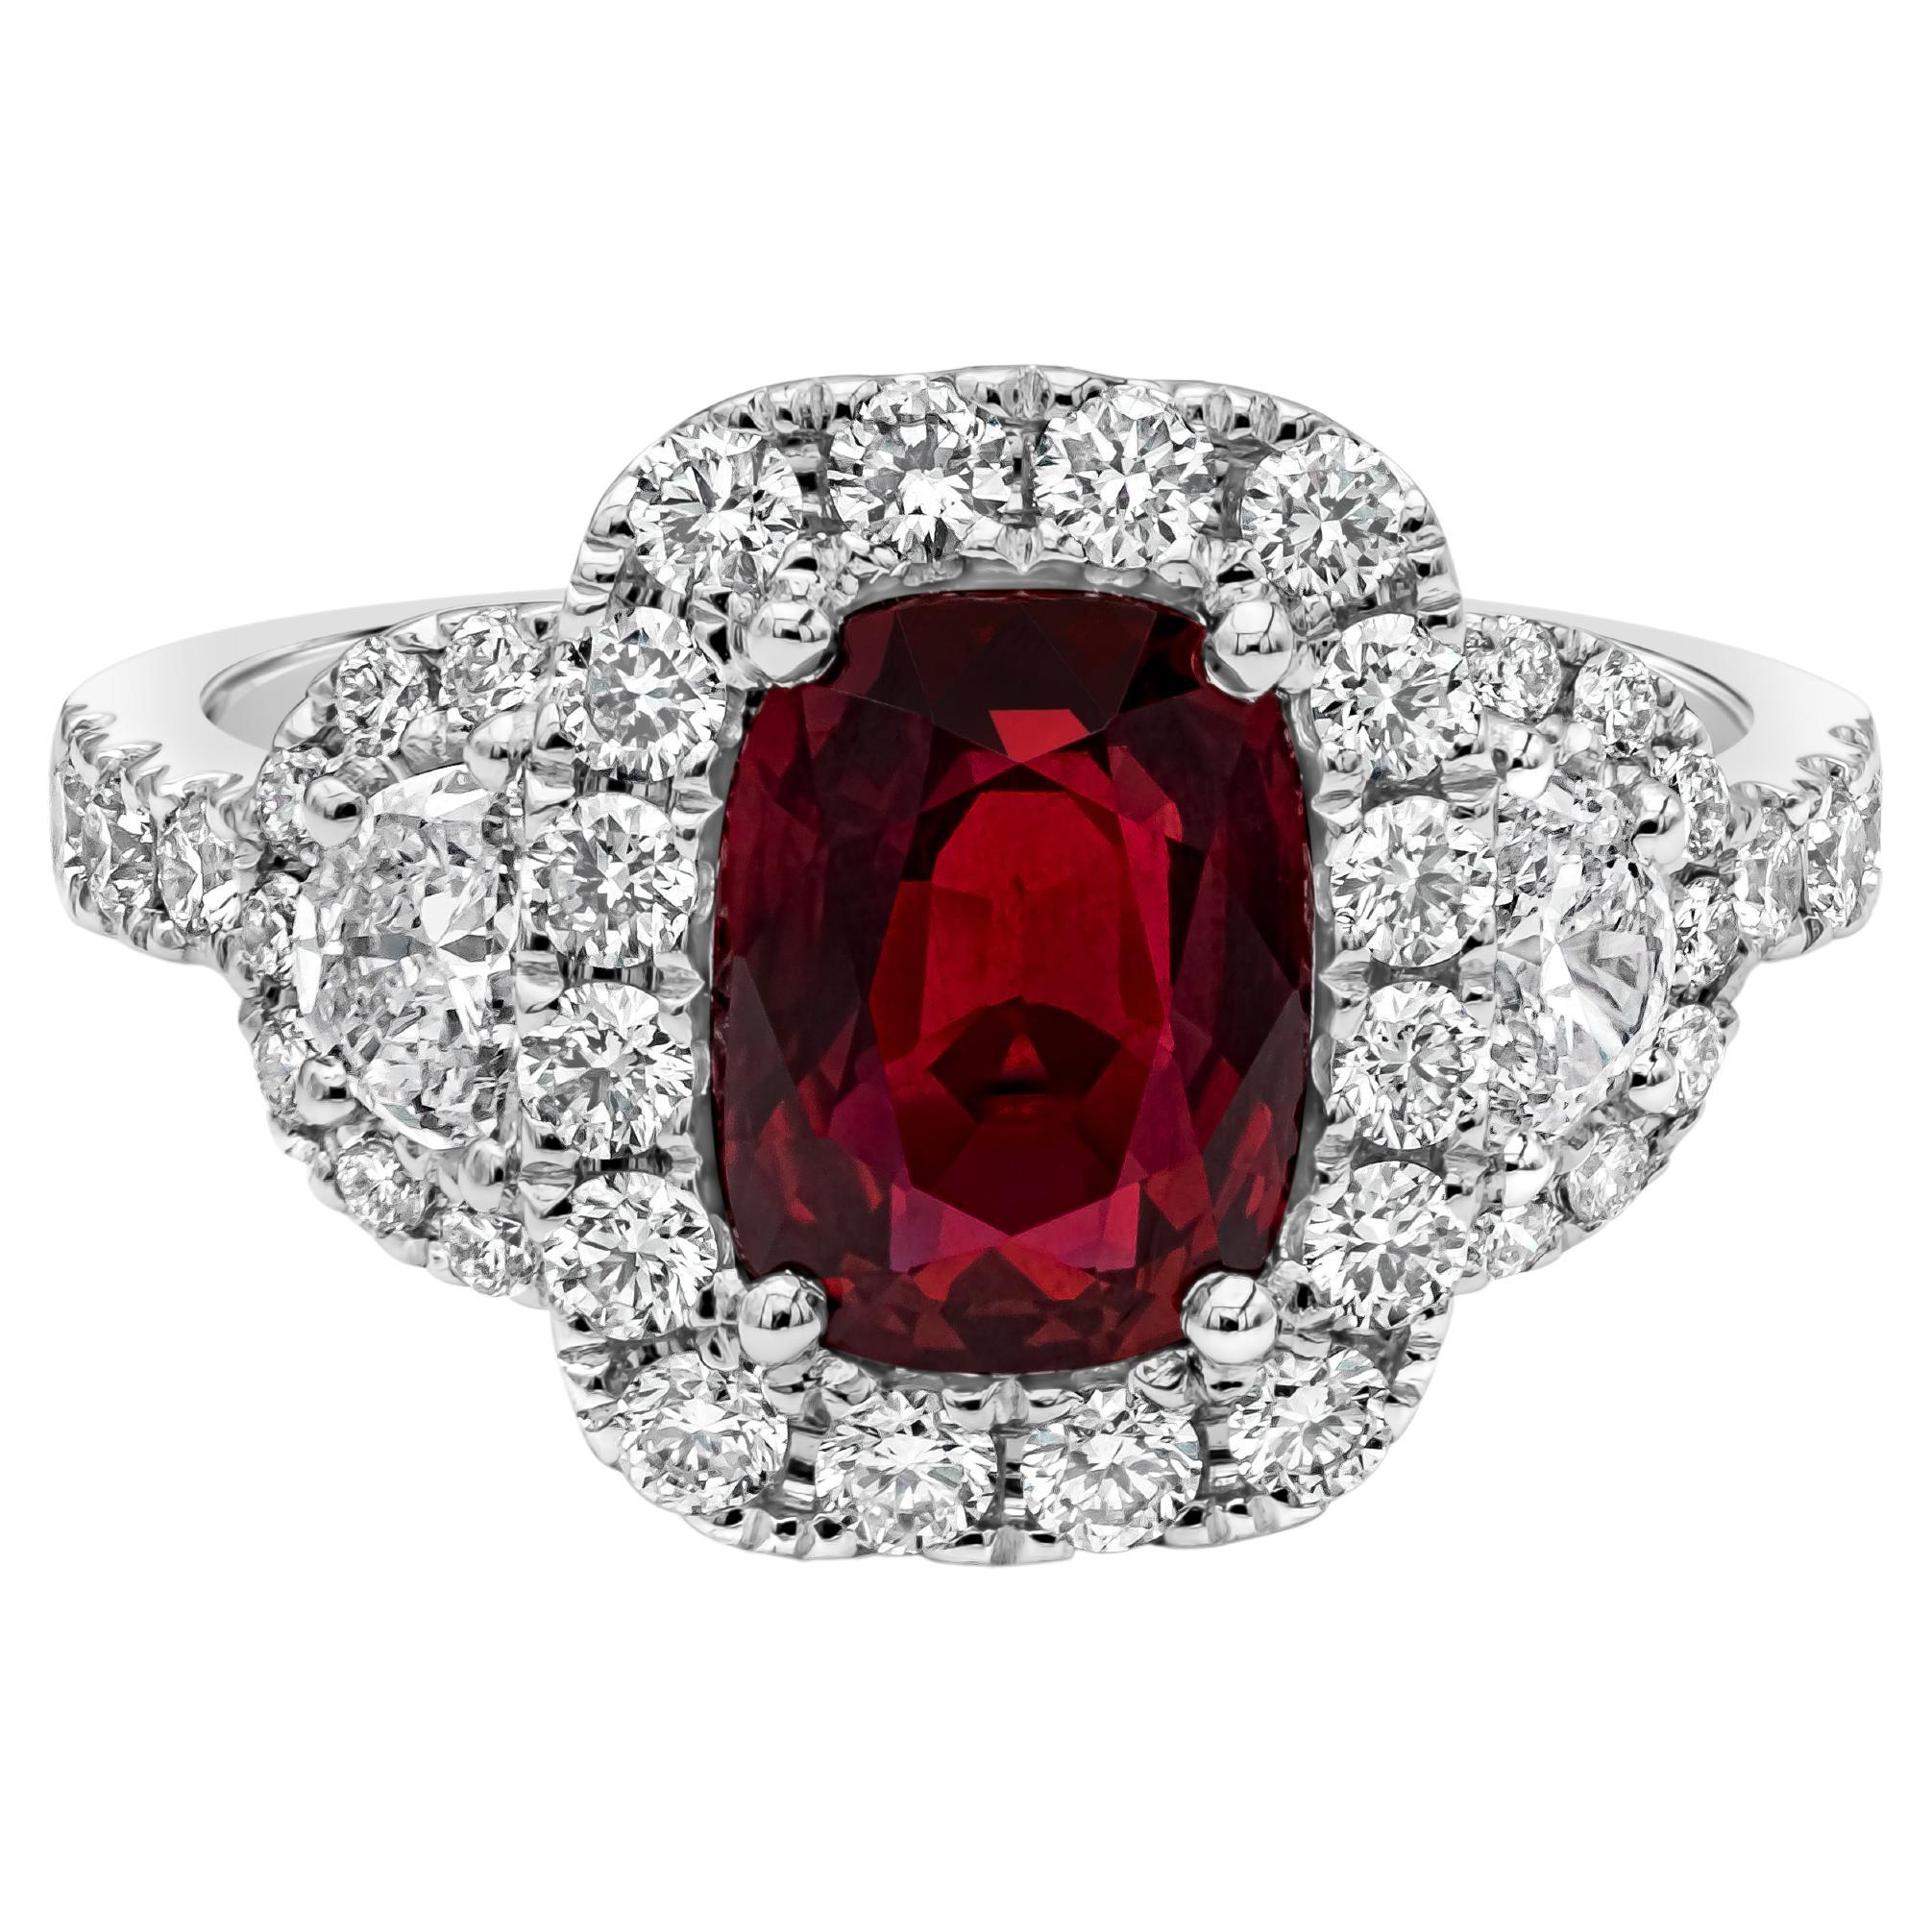 A contemporary piece of jewelry showcasing a GRS certified color-rich cushion cut ruby center stone weighing 2.32 carats total, set in a classic four prong setting in a halo design. Flanked by two half moon diamonds on each side weighing 0.29 carats